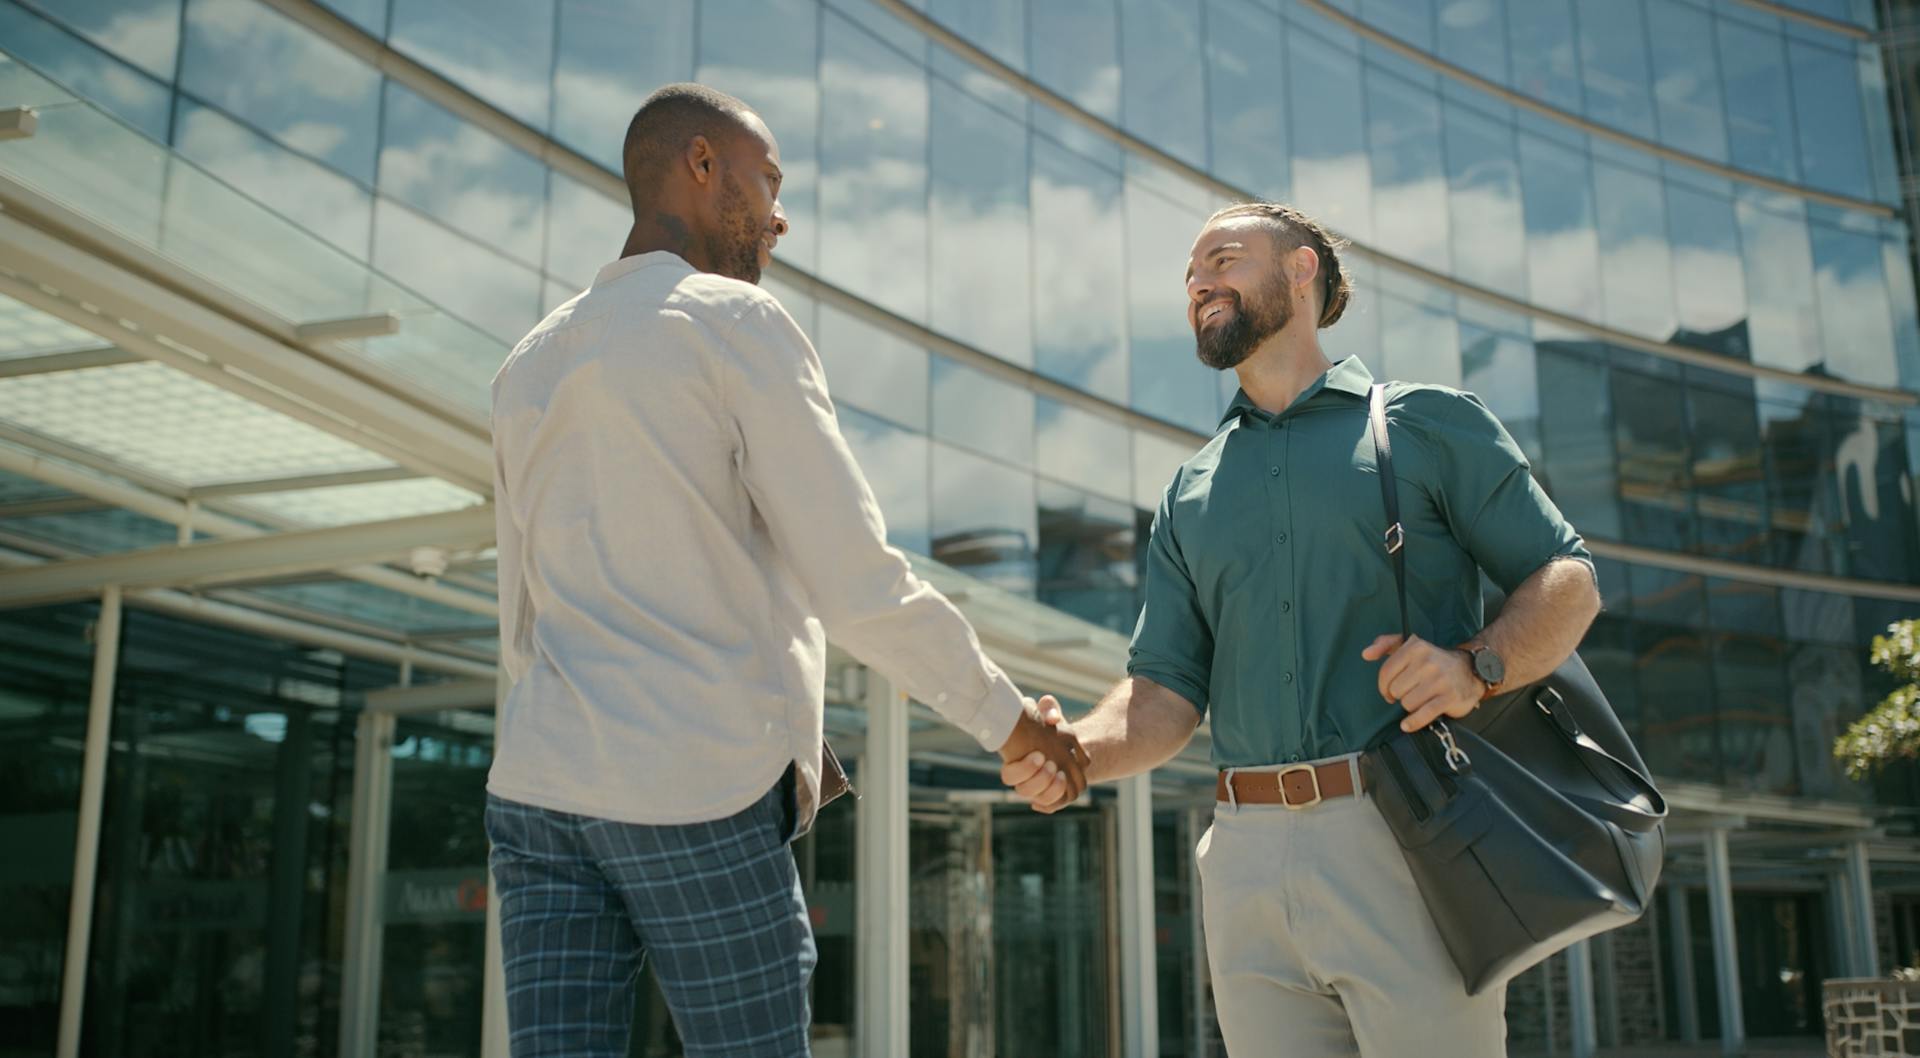 Two men shaking hands in front of a facility